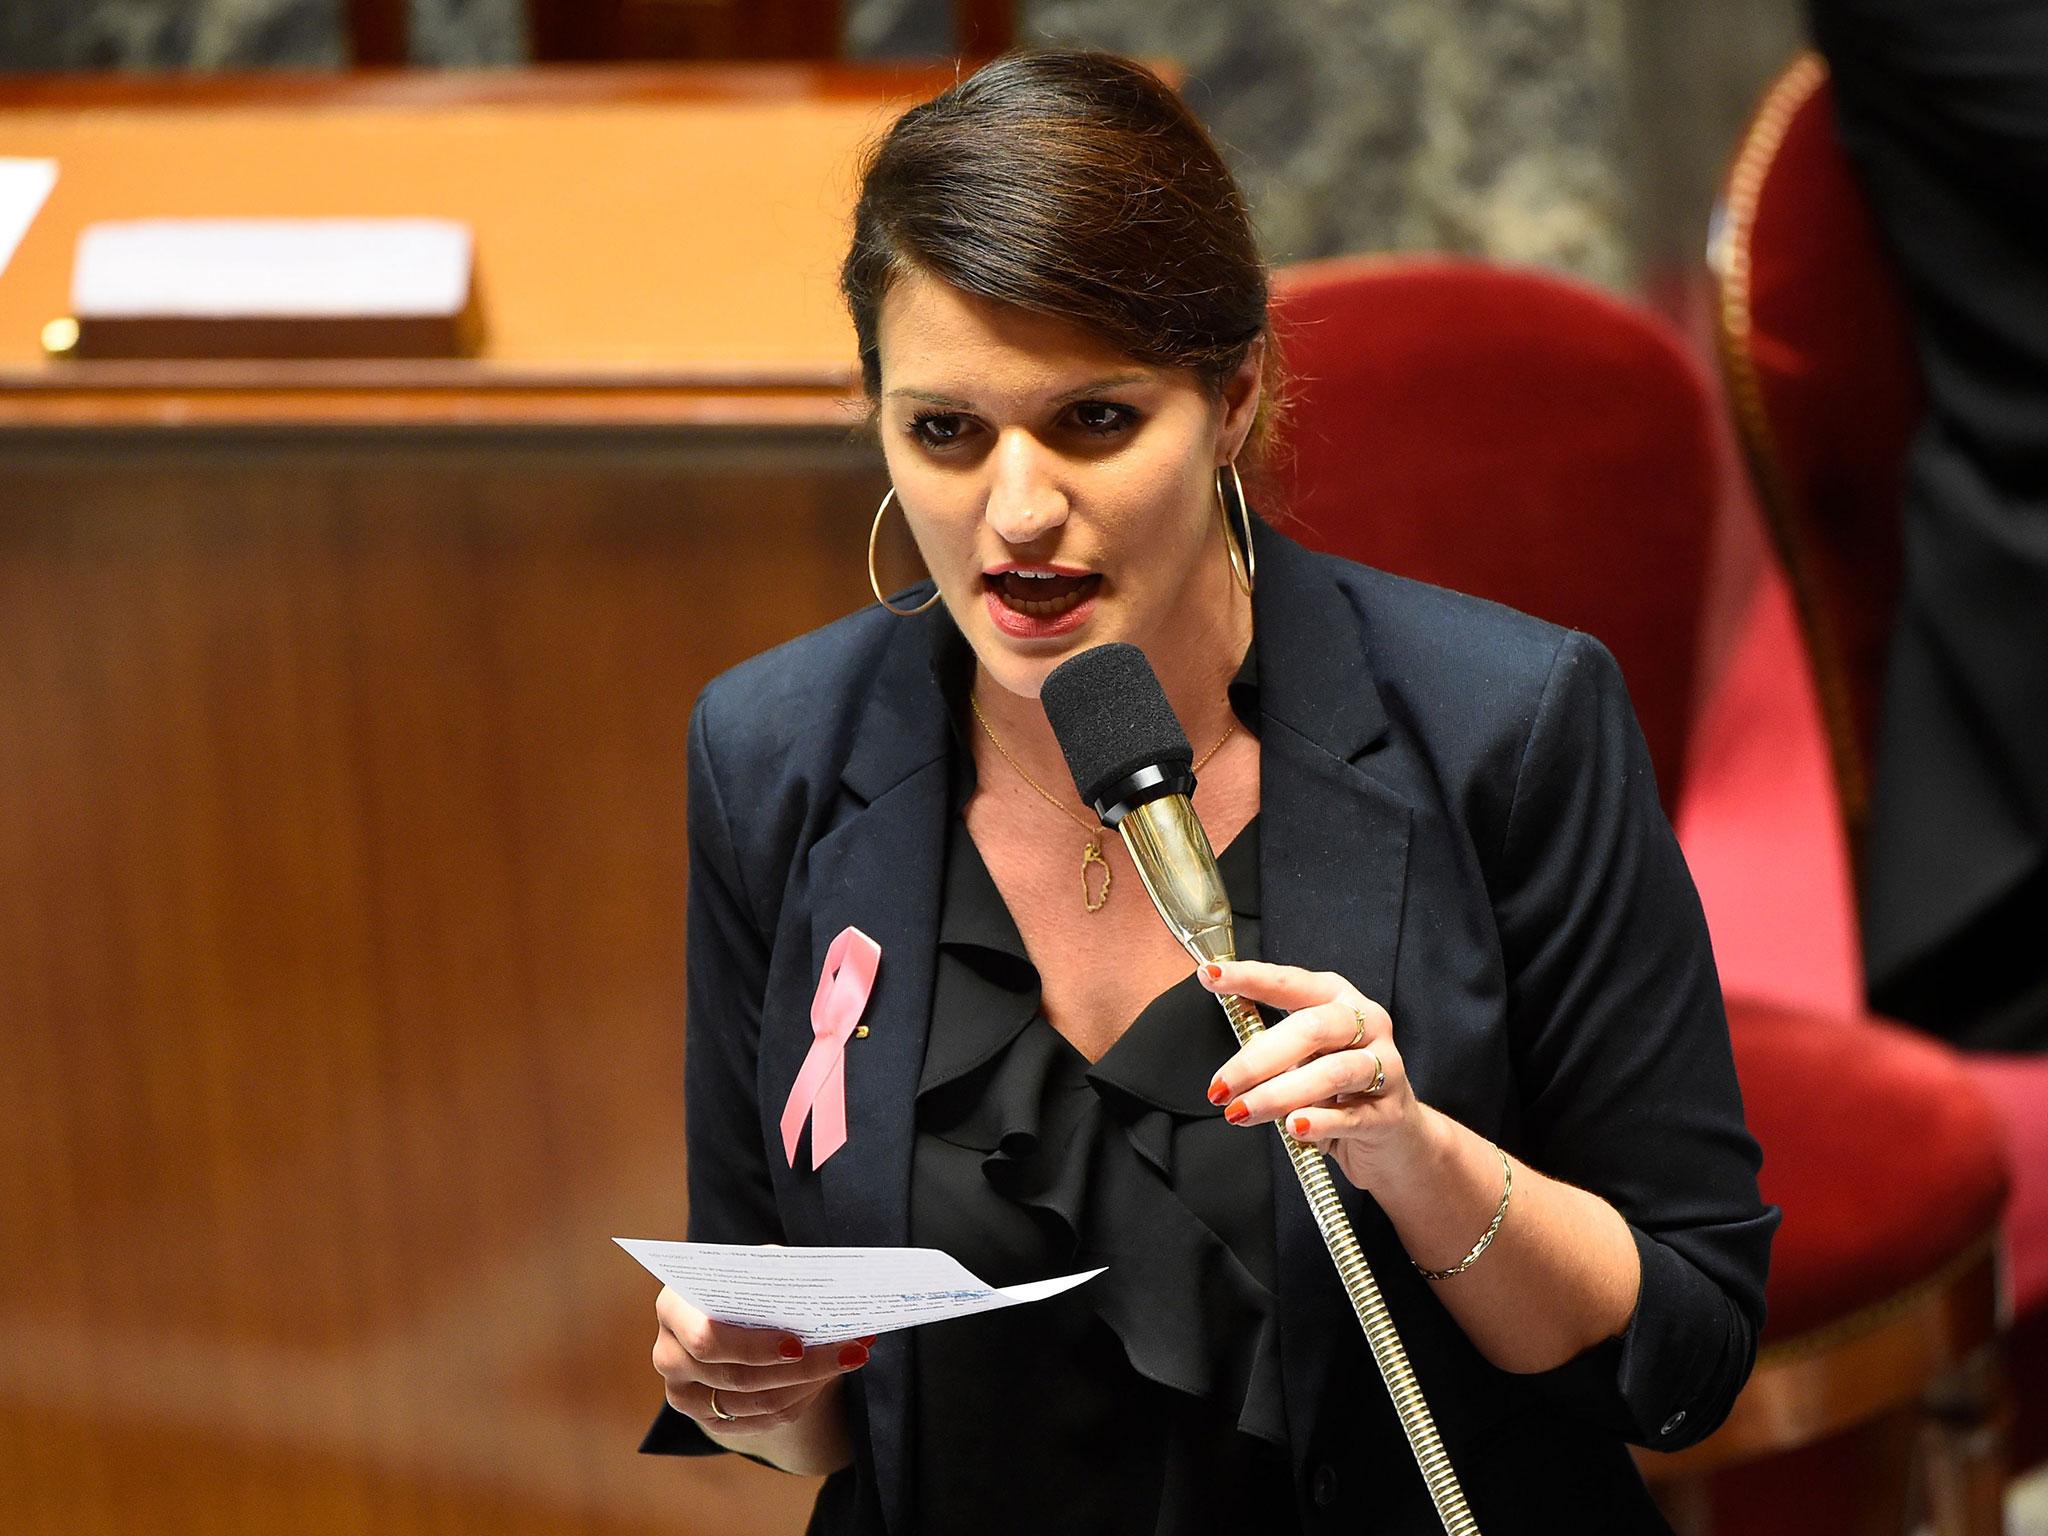 Marlene Schiappa, France's minister for gender equality, is heading the campaign against sexual harassment